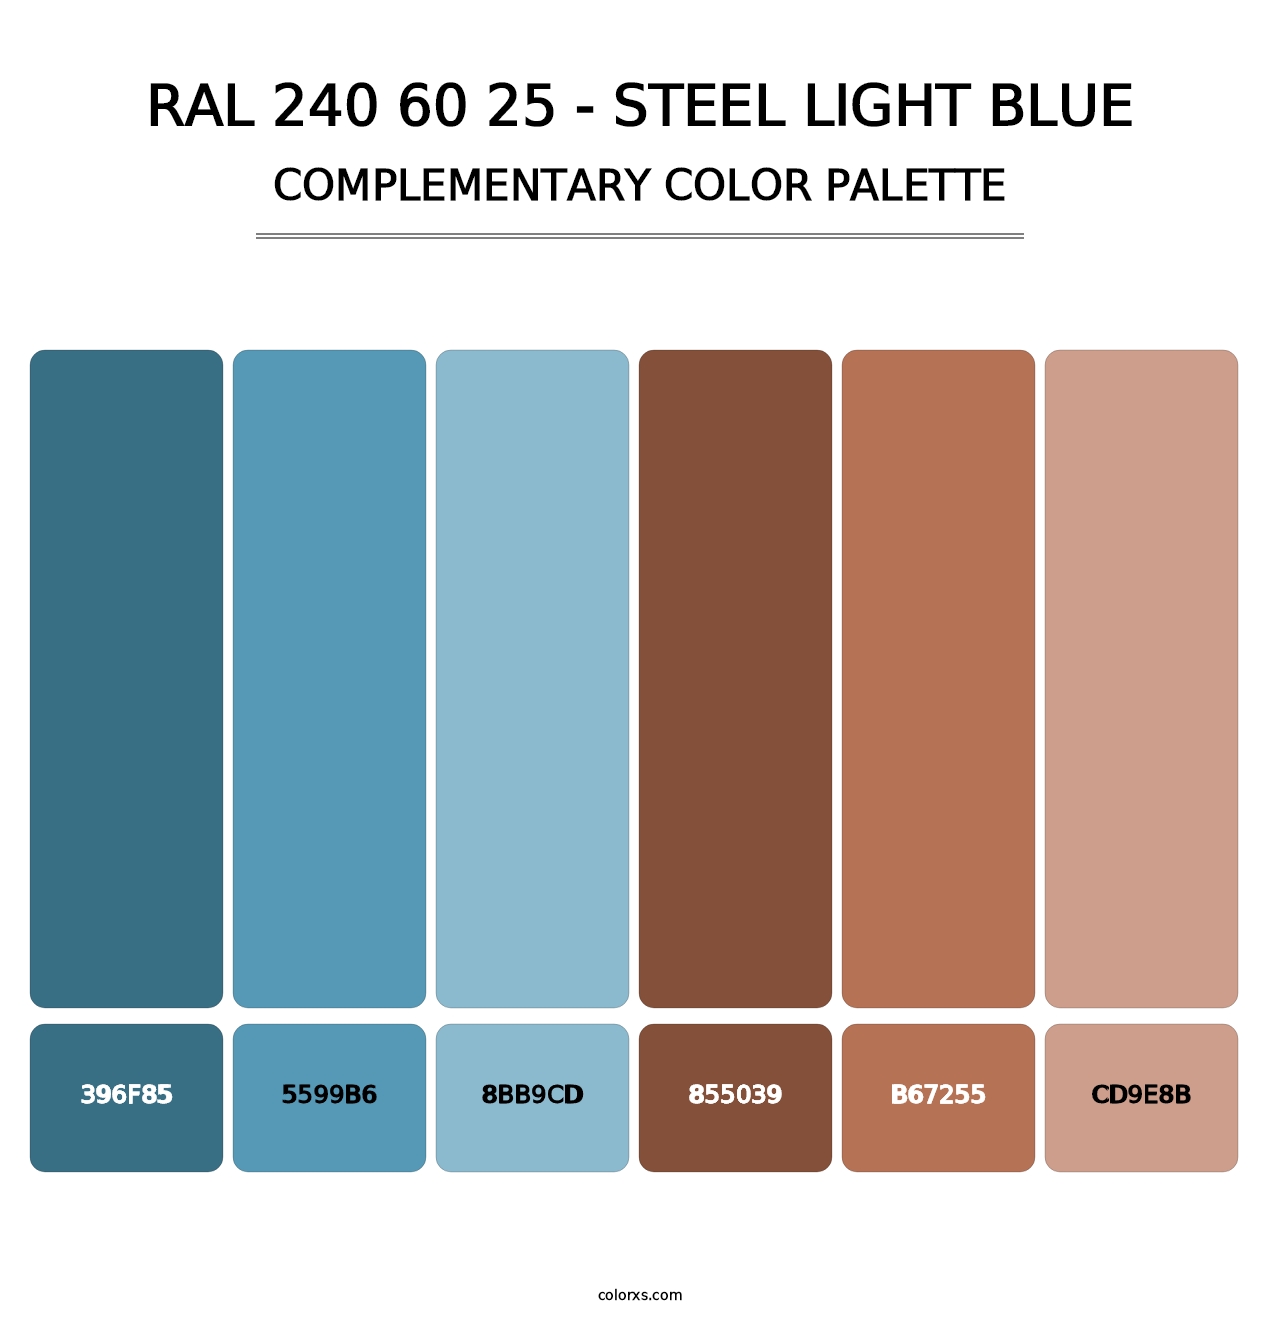 RAL 240 60 25 - Steel Light Blue - Complementary Color Palette